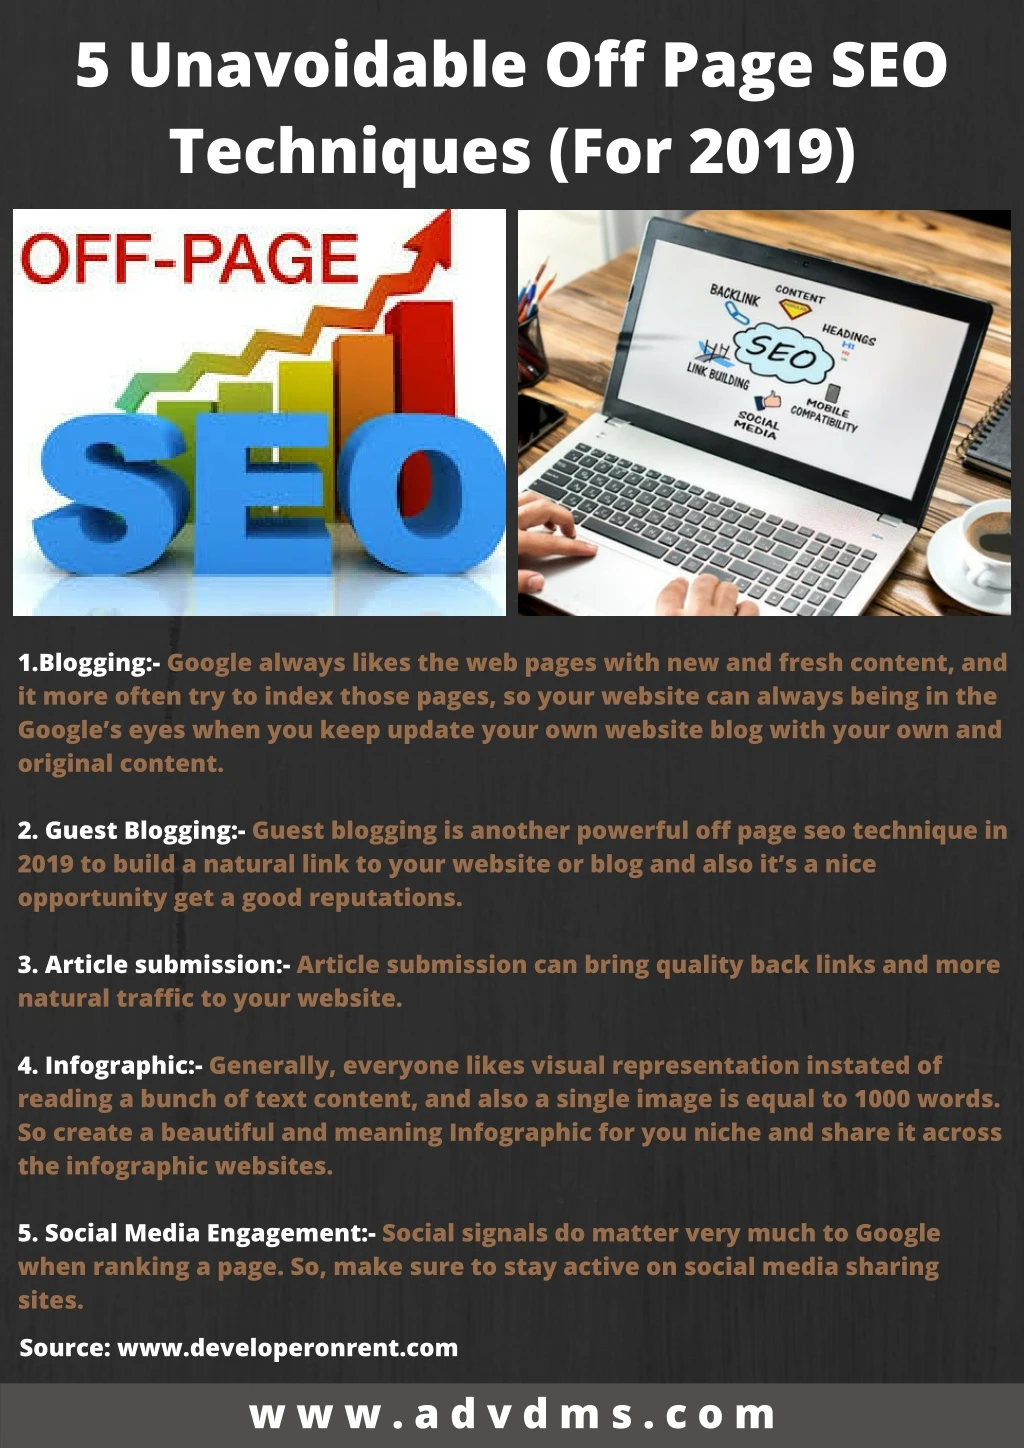 5 unavoidable off page seo techniques for 2019